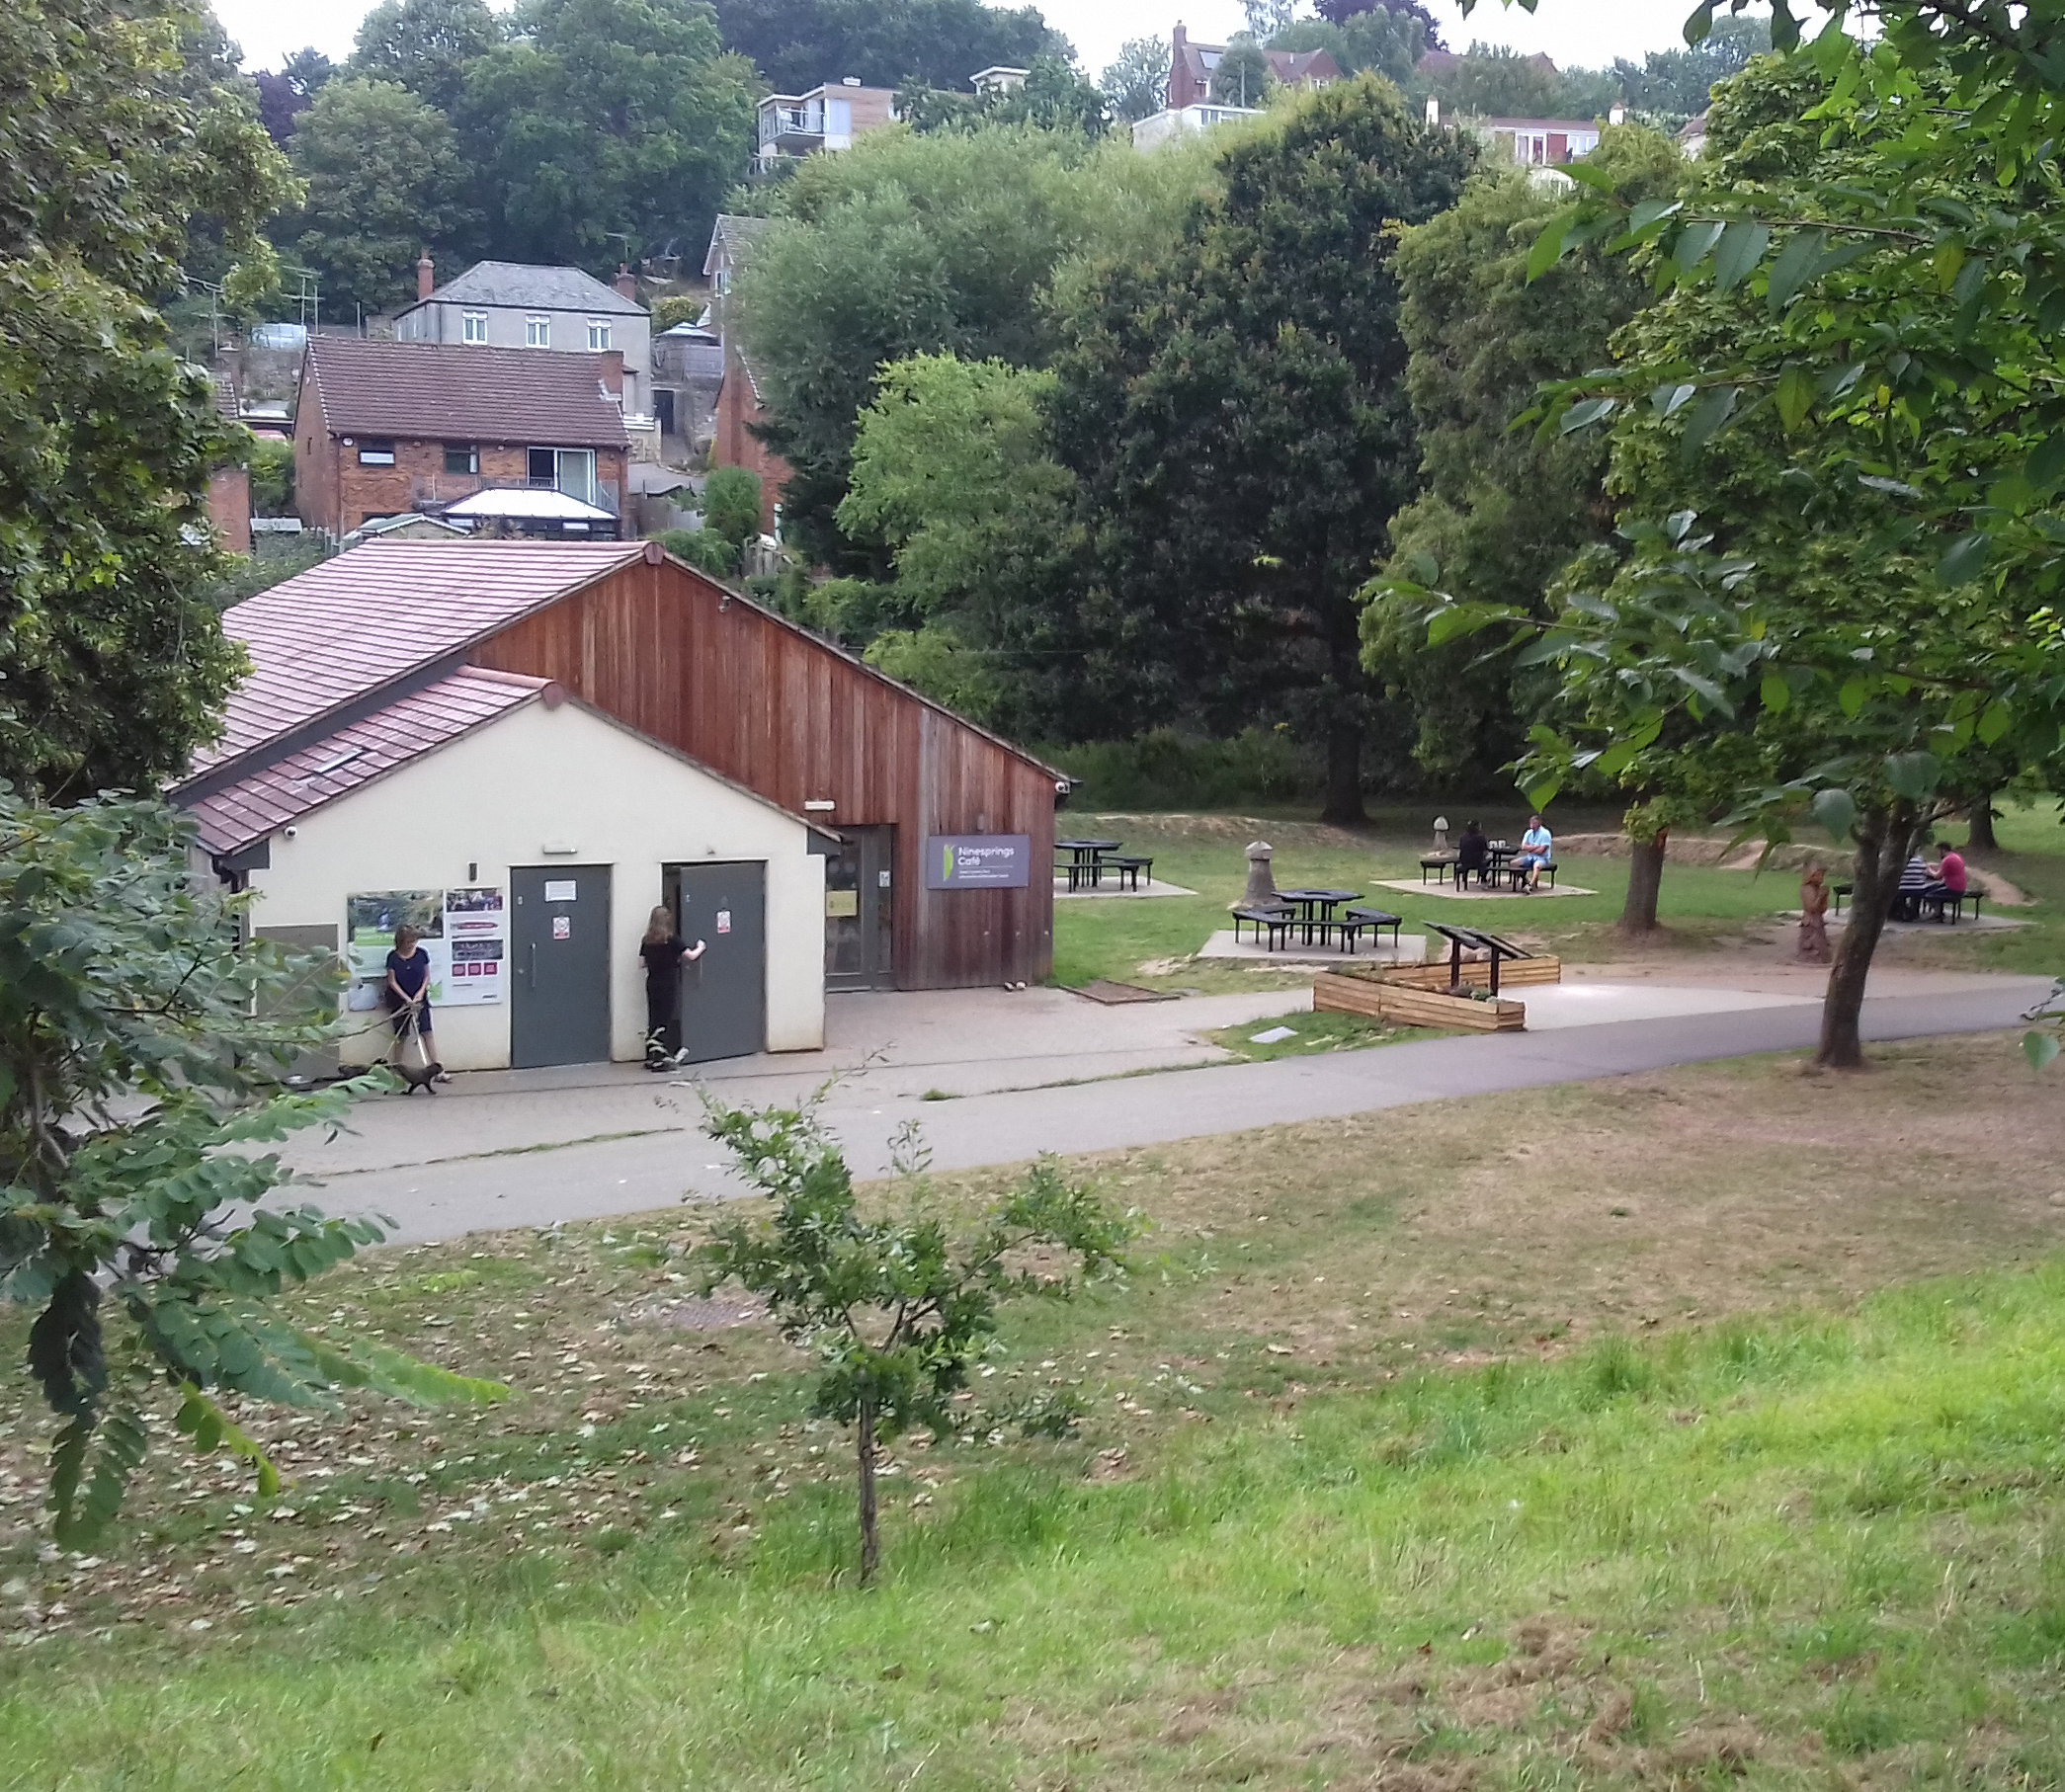 A wooden cafe structure with picnic benches outside set in woodland